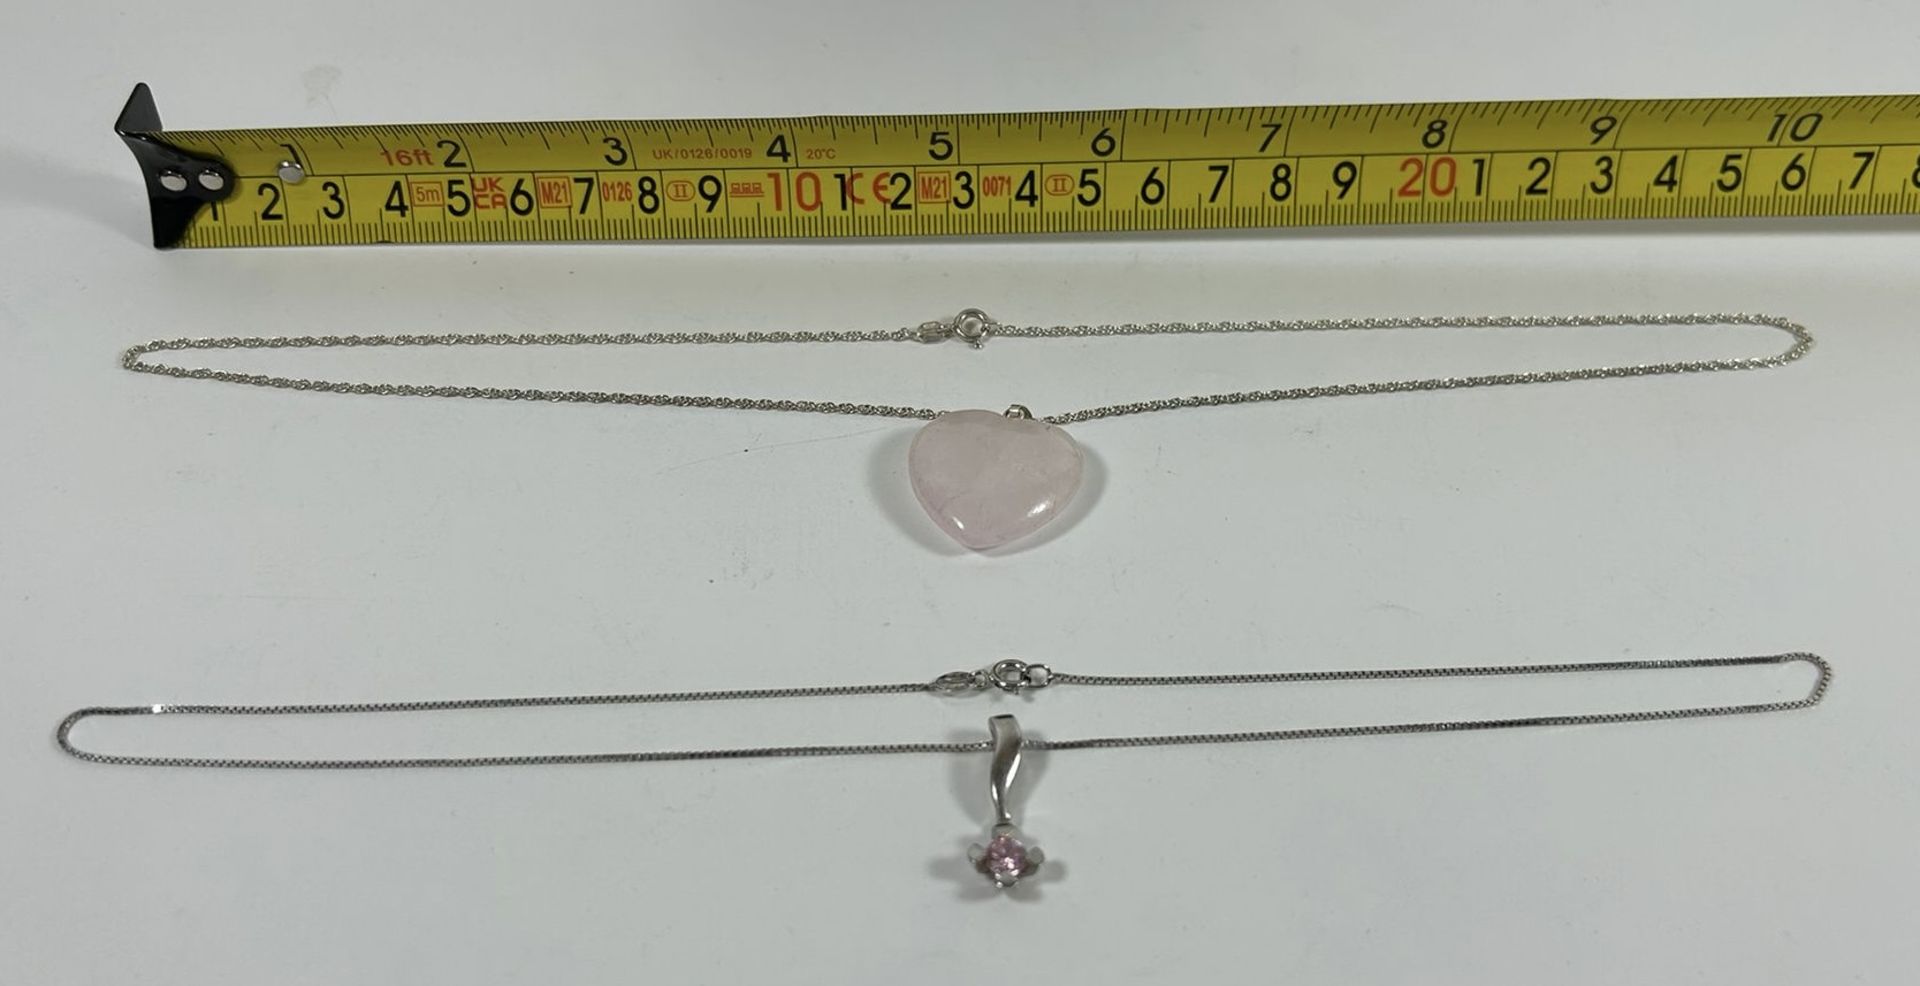 TWO .925 SILVER NECKLACES WITH HEART STONE AND PINK STONE PENDANT DESIGNS, LARGEST 20" CHAIN LENGTH - Image 4 of 4